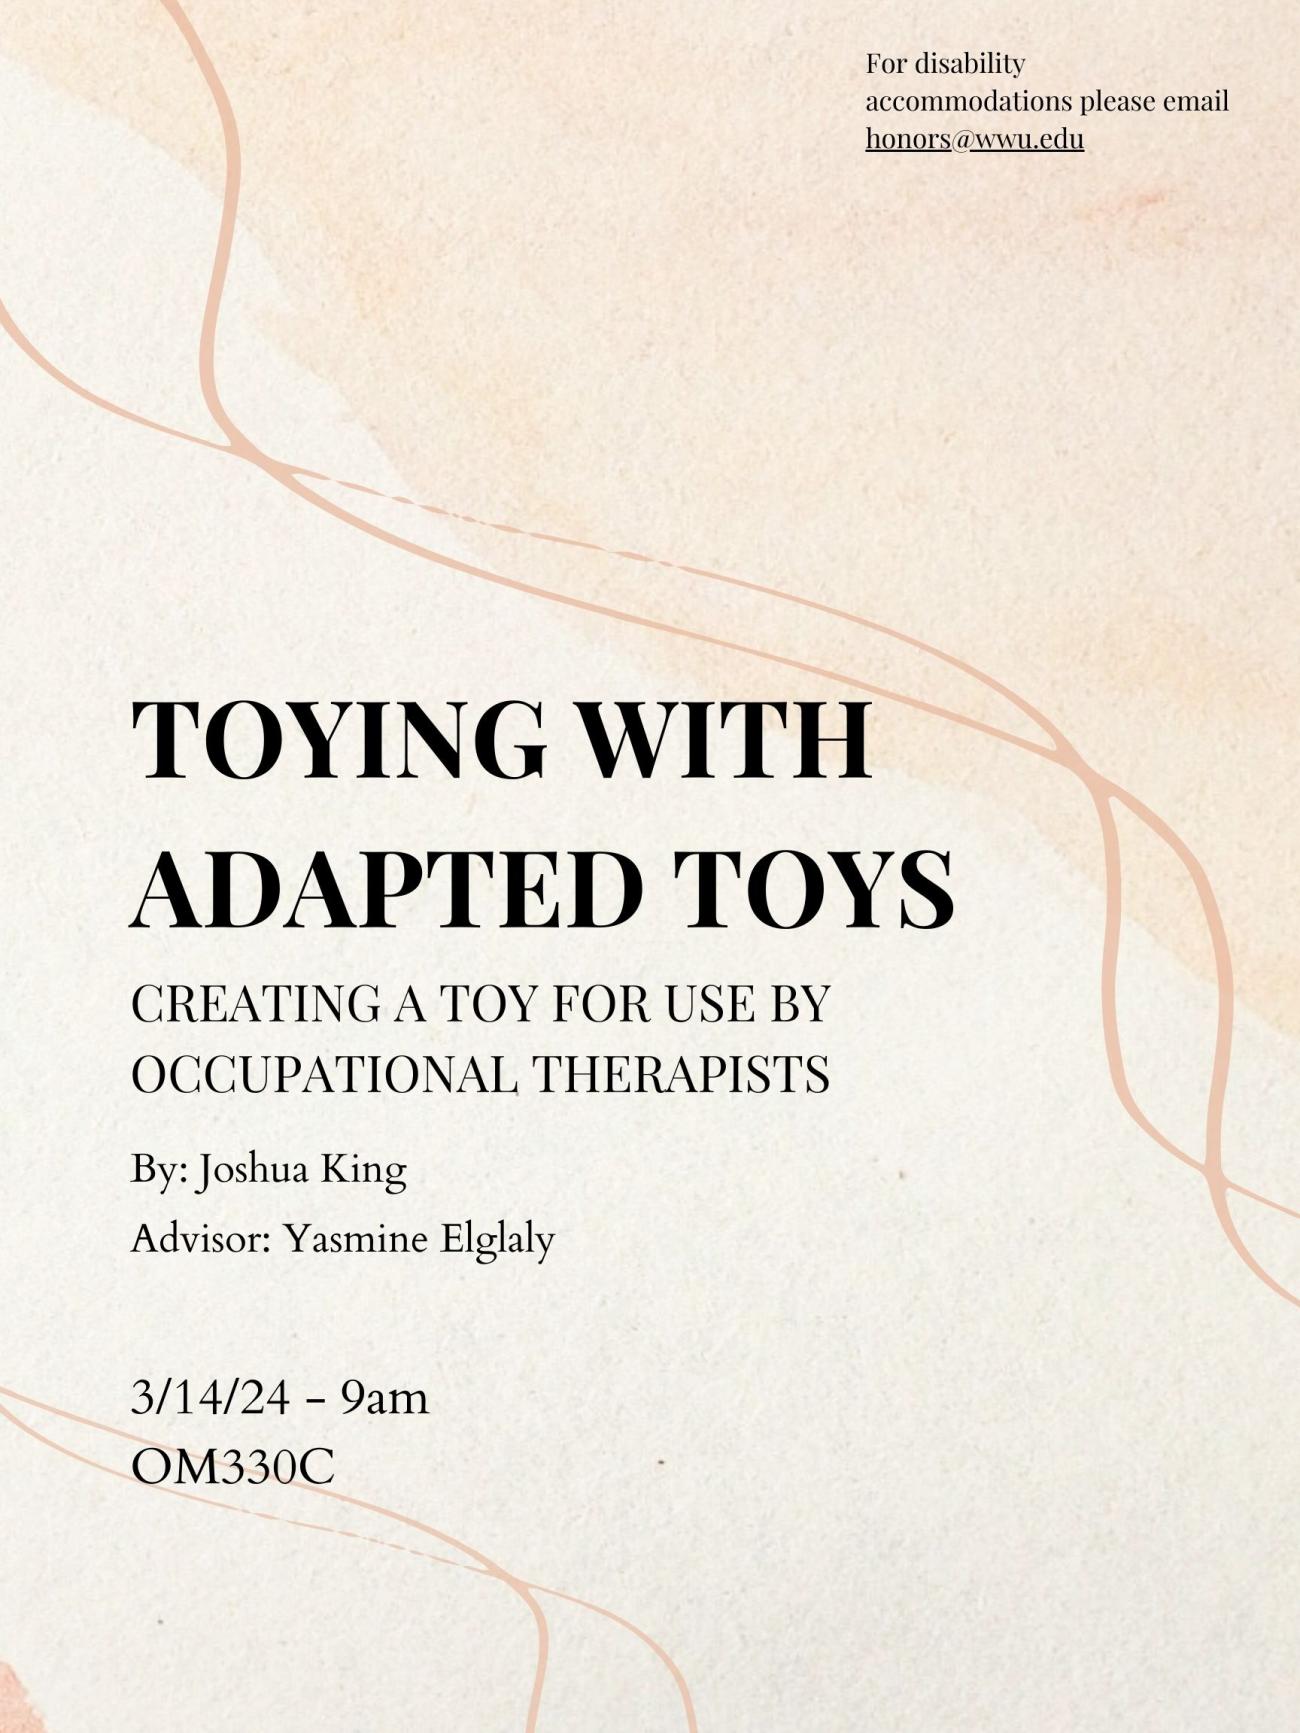 A tan background with several darker lines lazily wiggling from top left to the bottom right. The text reads "Toying with Adapted Toys. Creating a toy for use by occupational therapists. By Joshua King. Advisor: Yasmine Elglaly. 3/14/24 - 9am OM330C. For disability accommodations please email honors@wwu.edu"